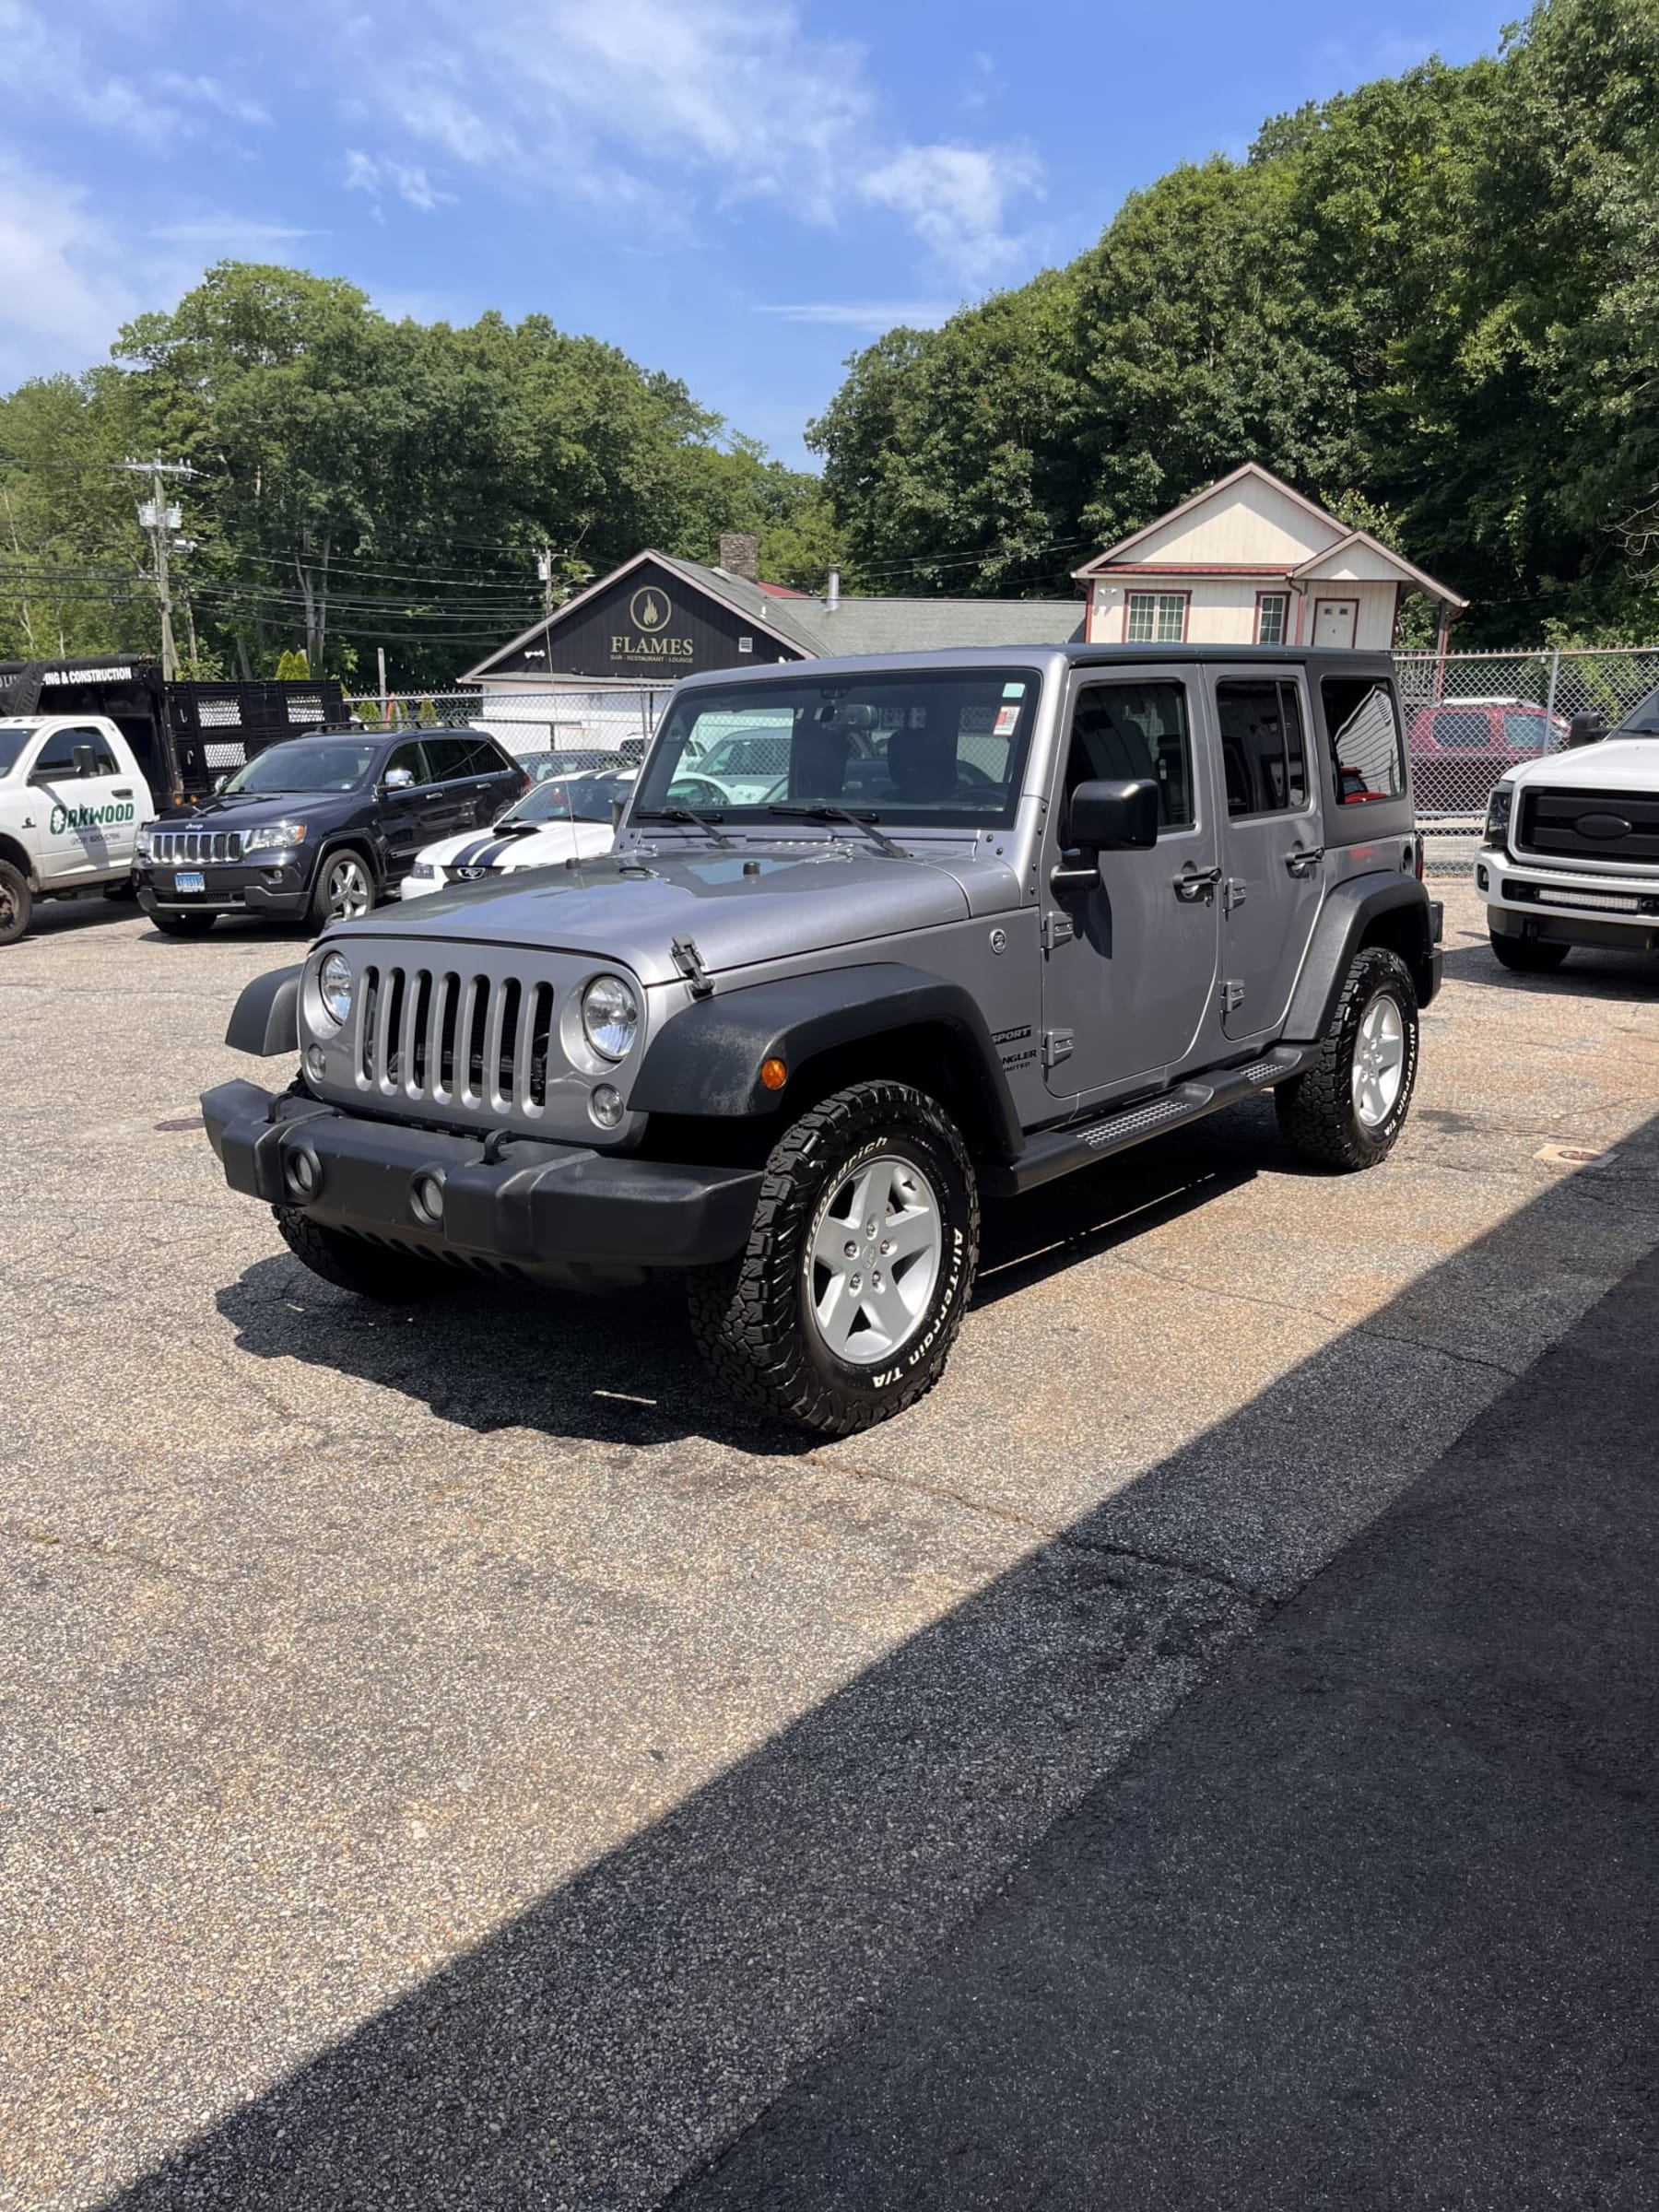 NEW ARRIVAL!! 2017 Jeep Unlimited Sport S!! One owner car!! ONLY 52k miles!! Freedom hardtop, remote start, heated seats, Bluetooth and much more!! Won’t last at $23,900!!